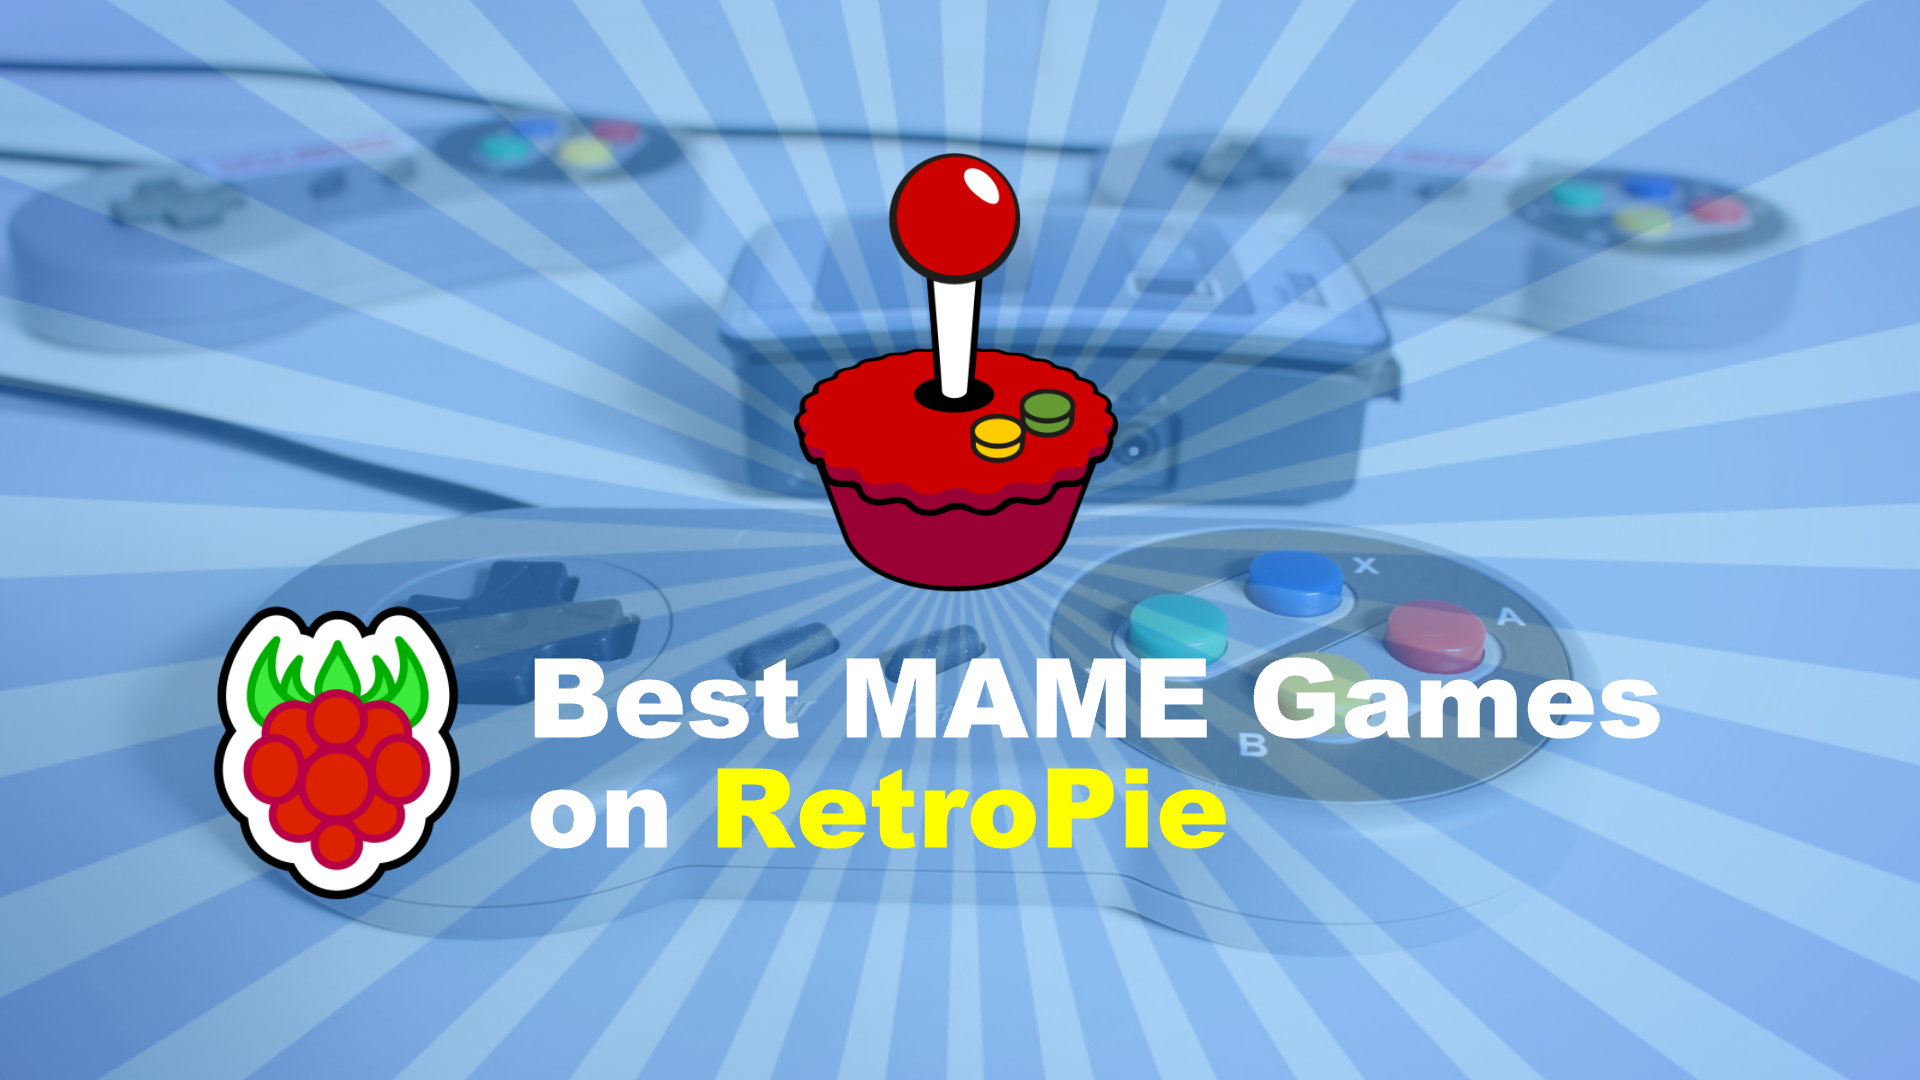 mame32 games free download